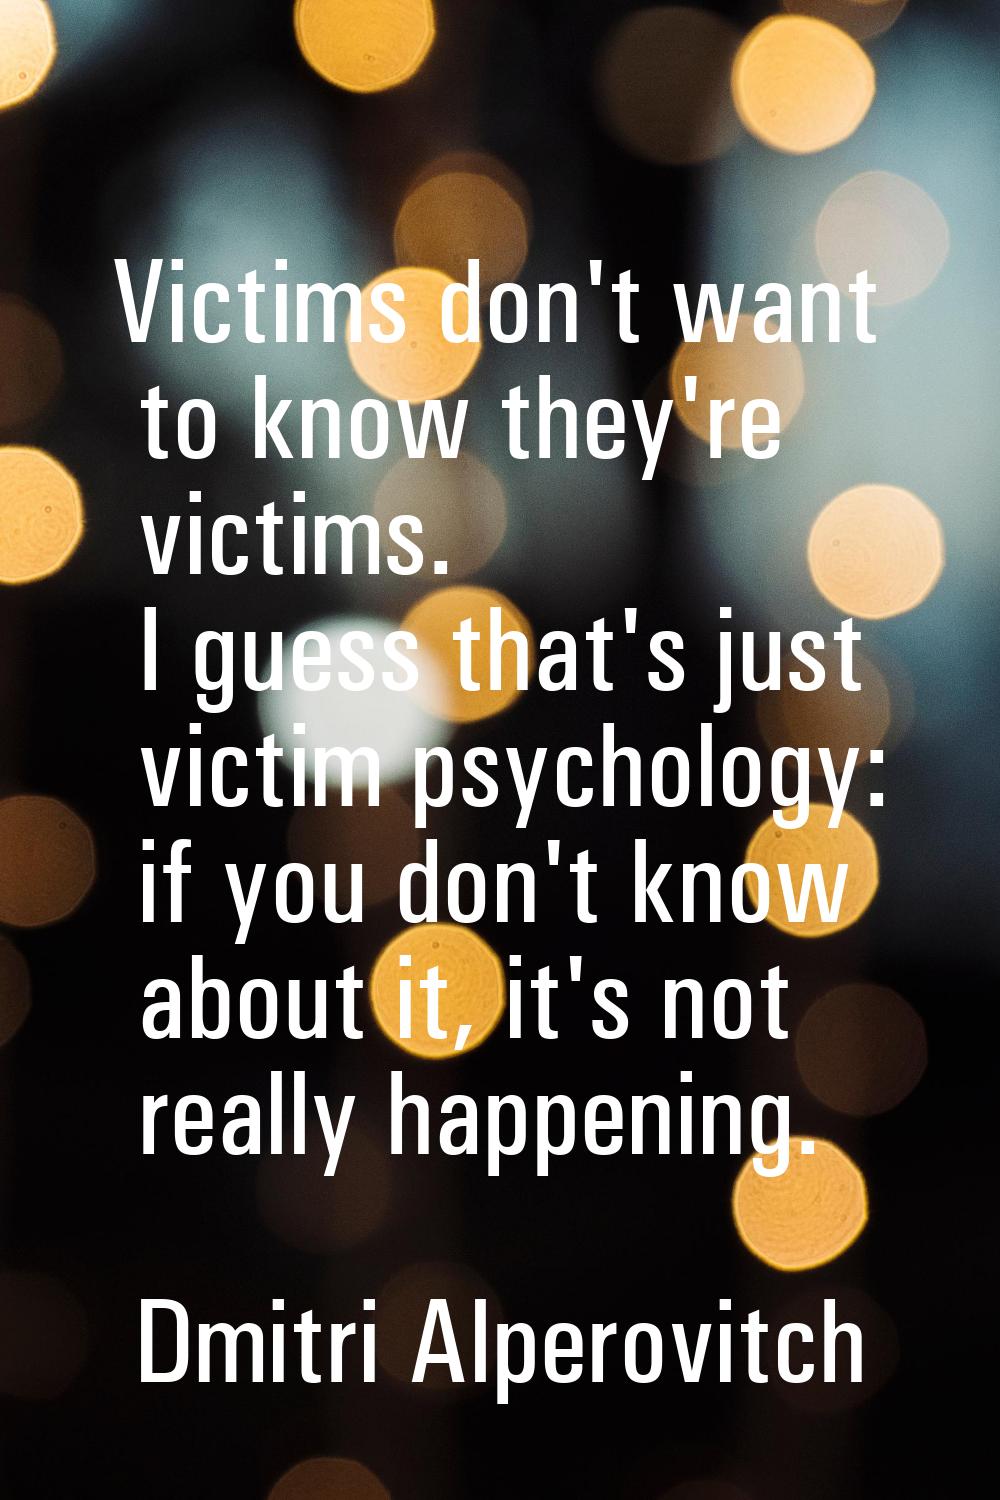 Victims don't want to know they're victims. I guess that's just victim psychology: if you don't kno